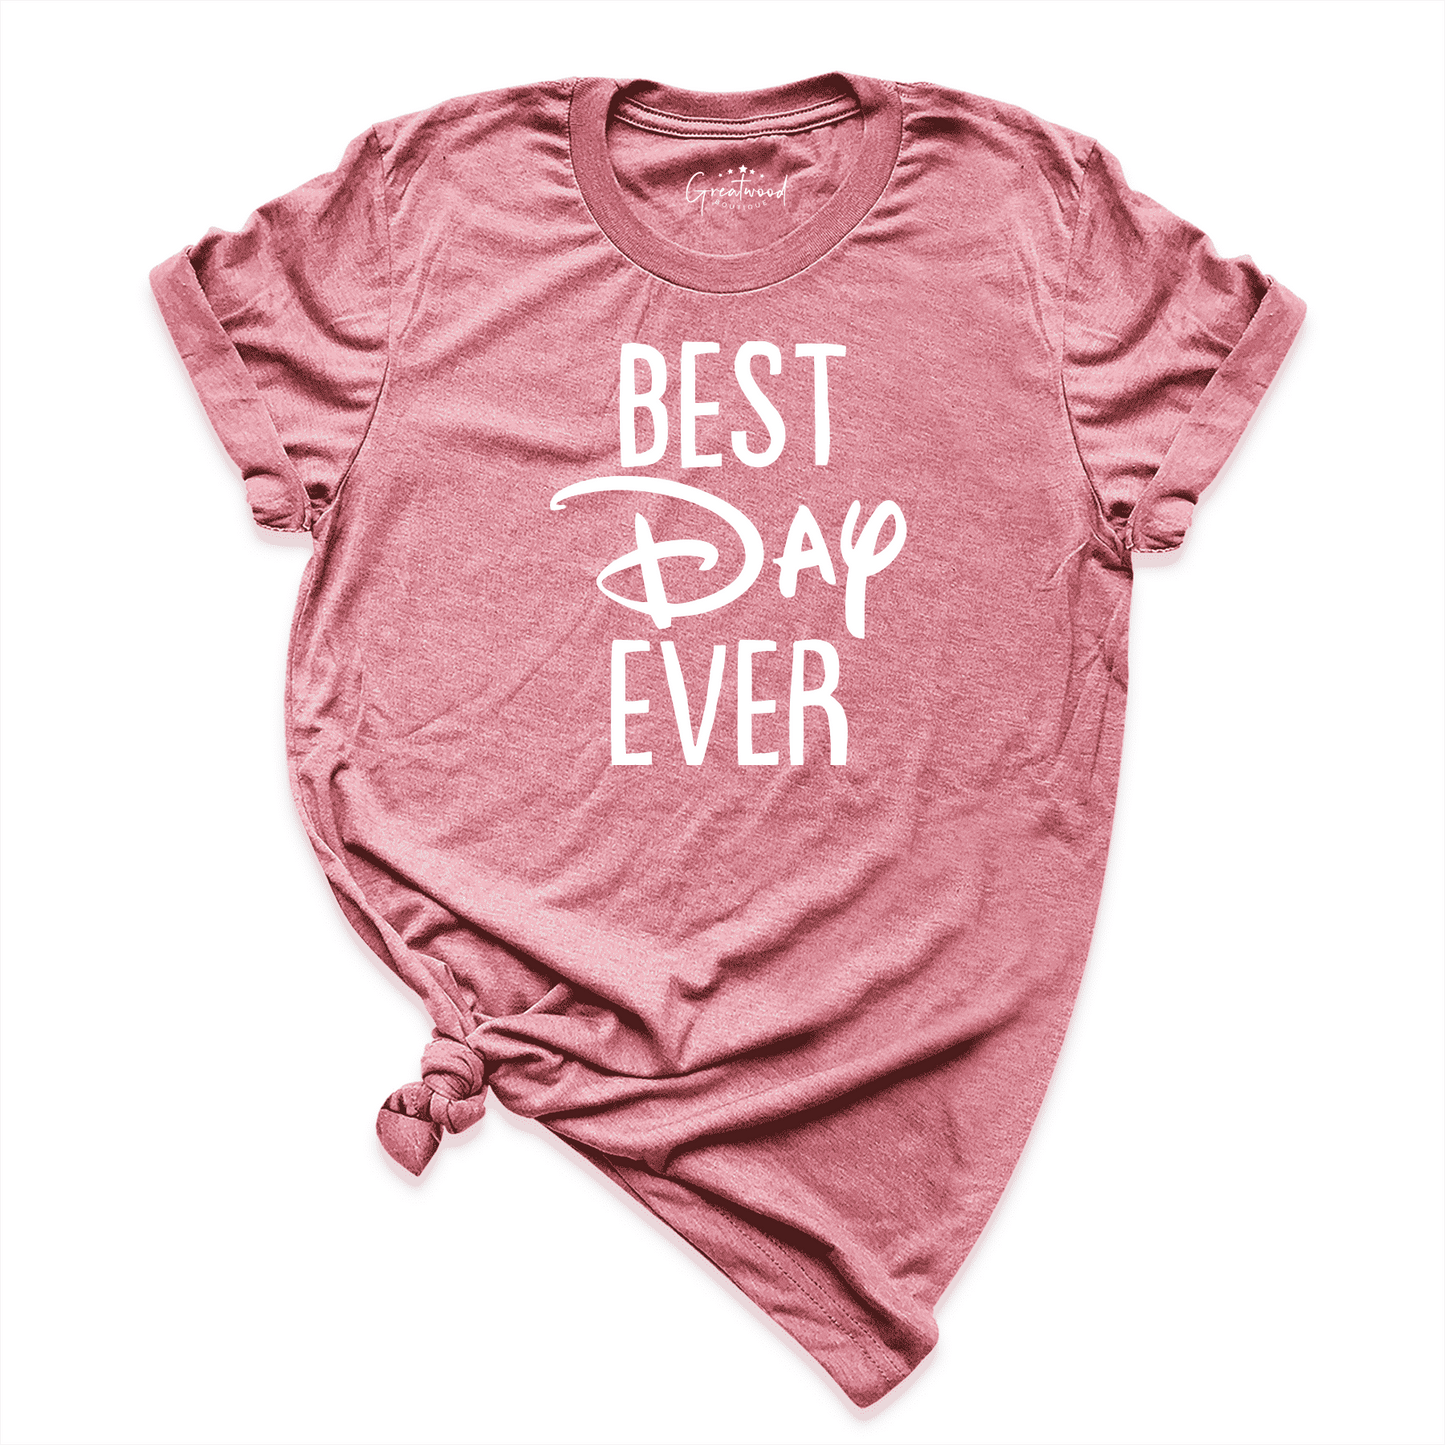 Best Day Ever Shirt Mauve - Greatwood Boutique